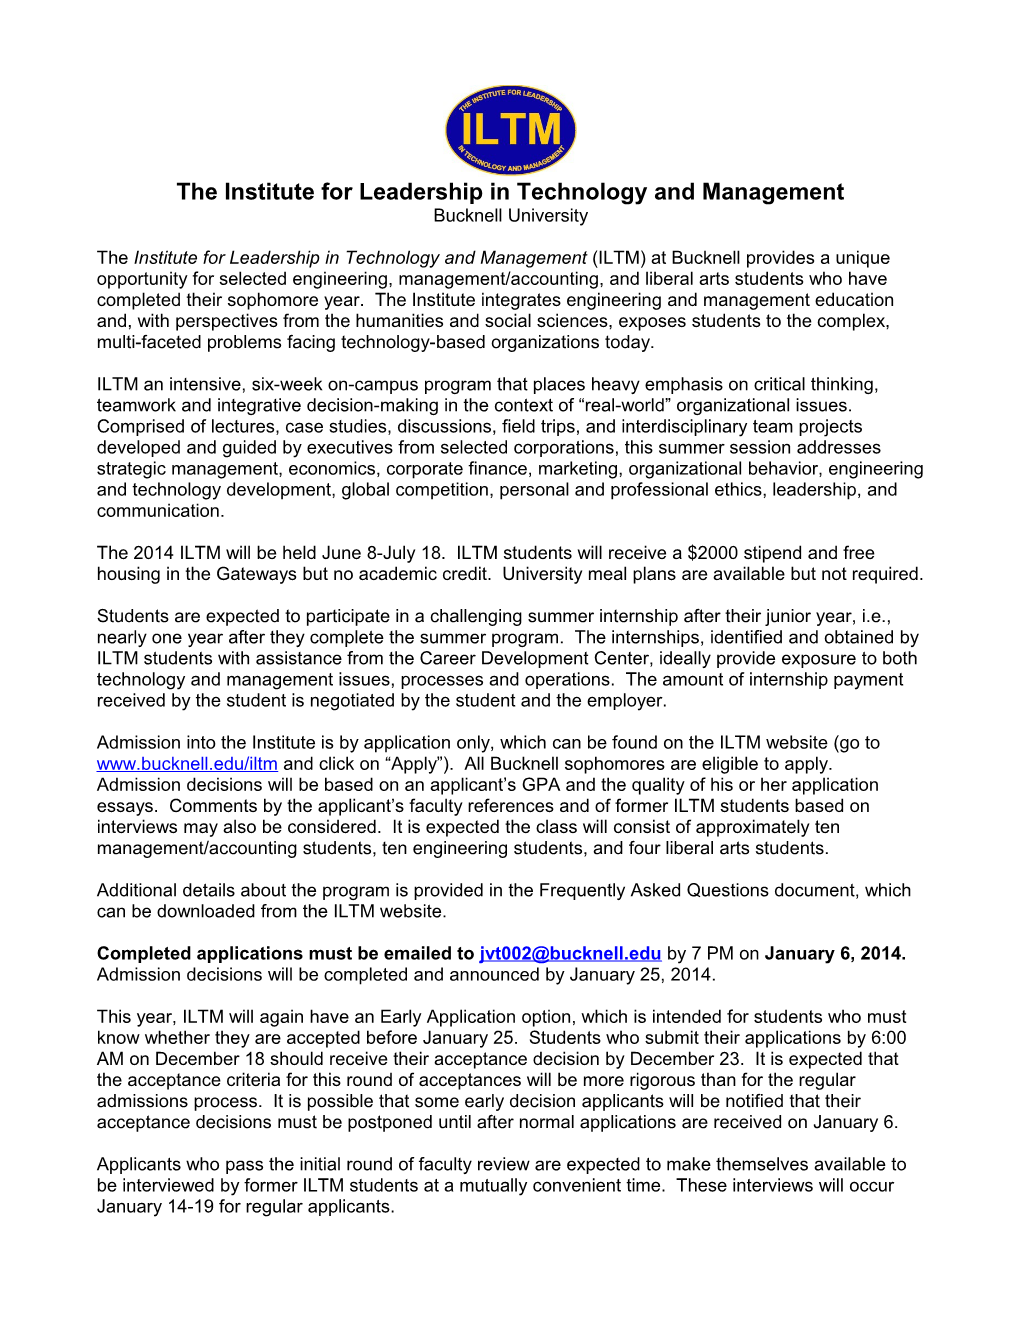 The Institute Forleadership in Technology and Management